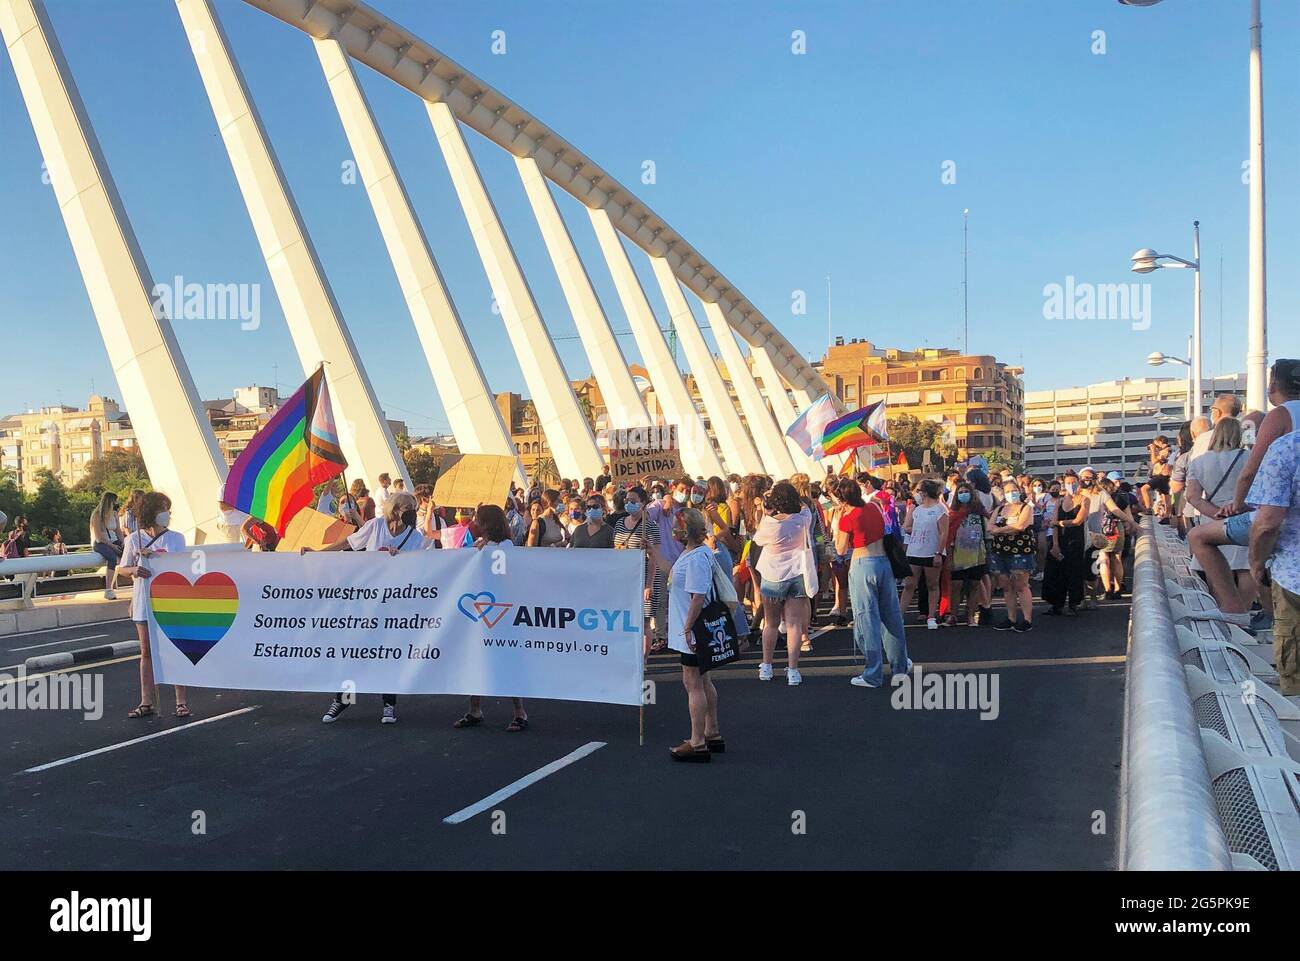 VALENCIA, SPAIN - Jun 28, 2021: Fathers in LGBT Pride Manifestation 2021 in the city of Valencia as a celebration of the International Gay Pride Day. Stock Photo